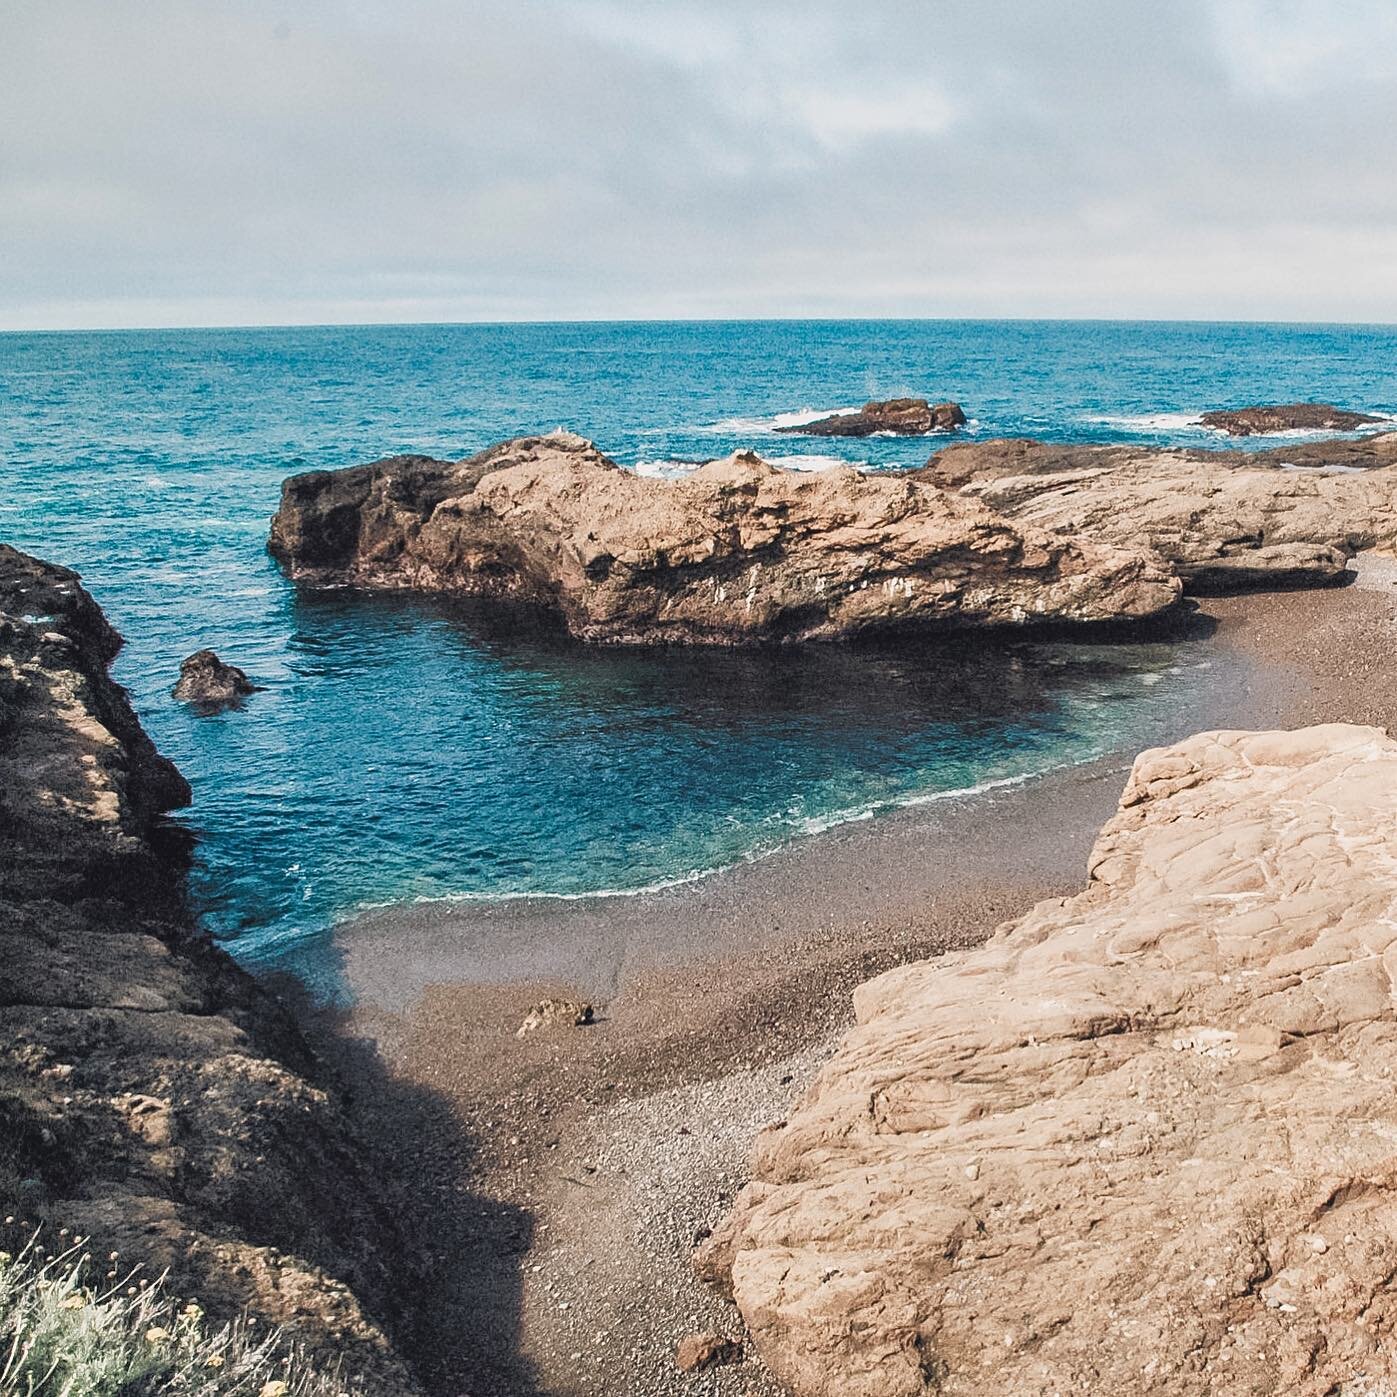 The beach is my happy place, that&rsquo;s for shore! 🤣

There is something so soothing about water to me. There&rsquo;s no such thing as a bad day at the beach, am I right?!

This is another gorgeous spot in Point Lobos State Natural Reserve along t